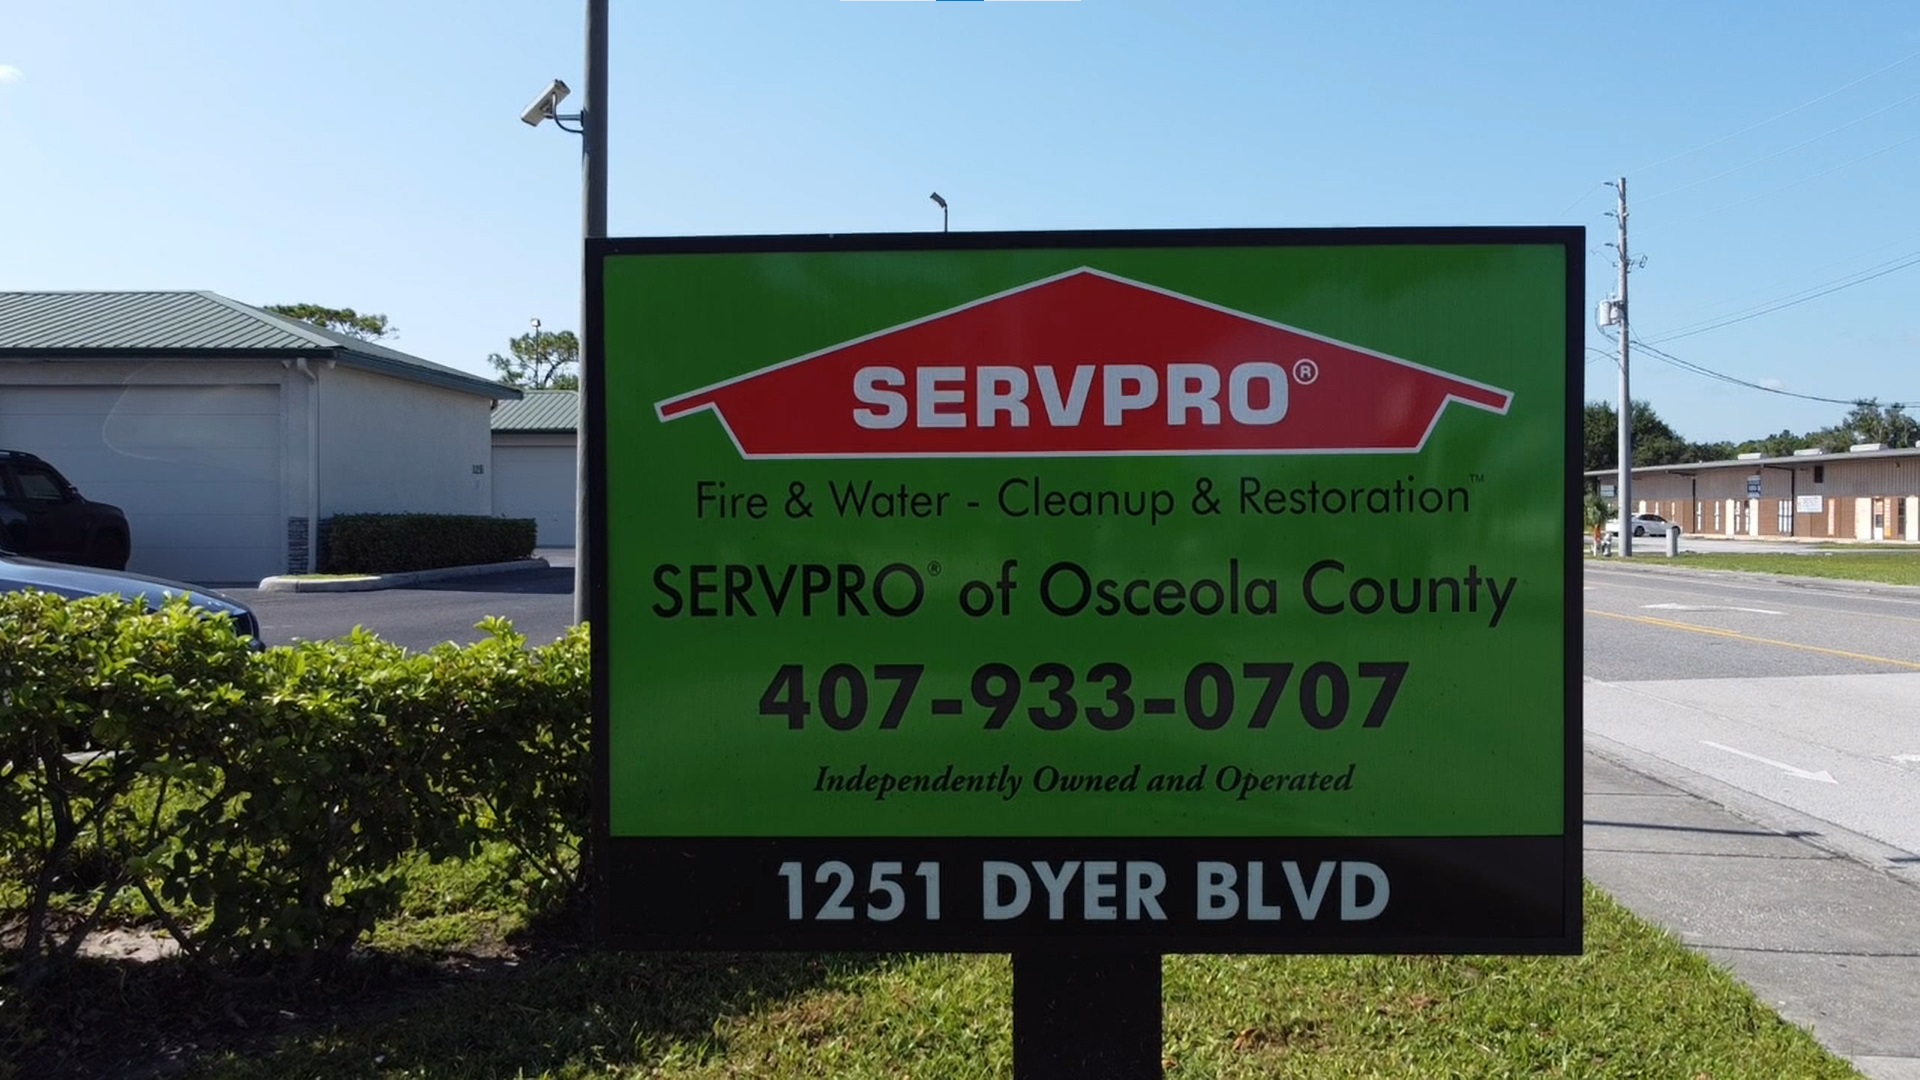 SERVPRO office on Dyer Blvd, just south of 192 in Kissimmee.